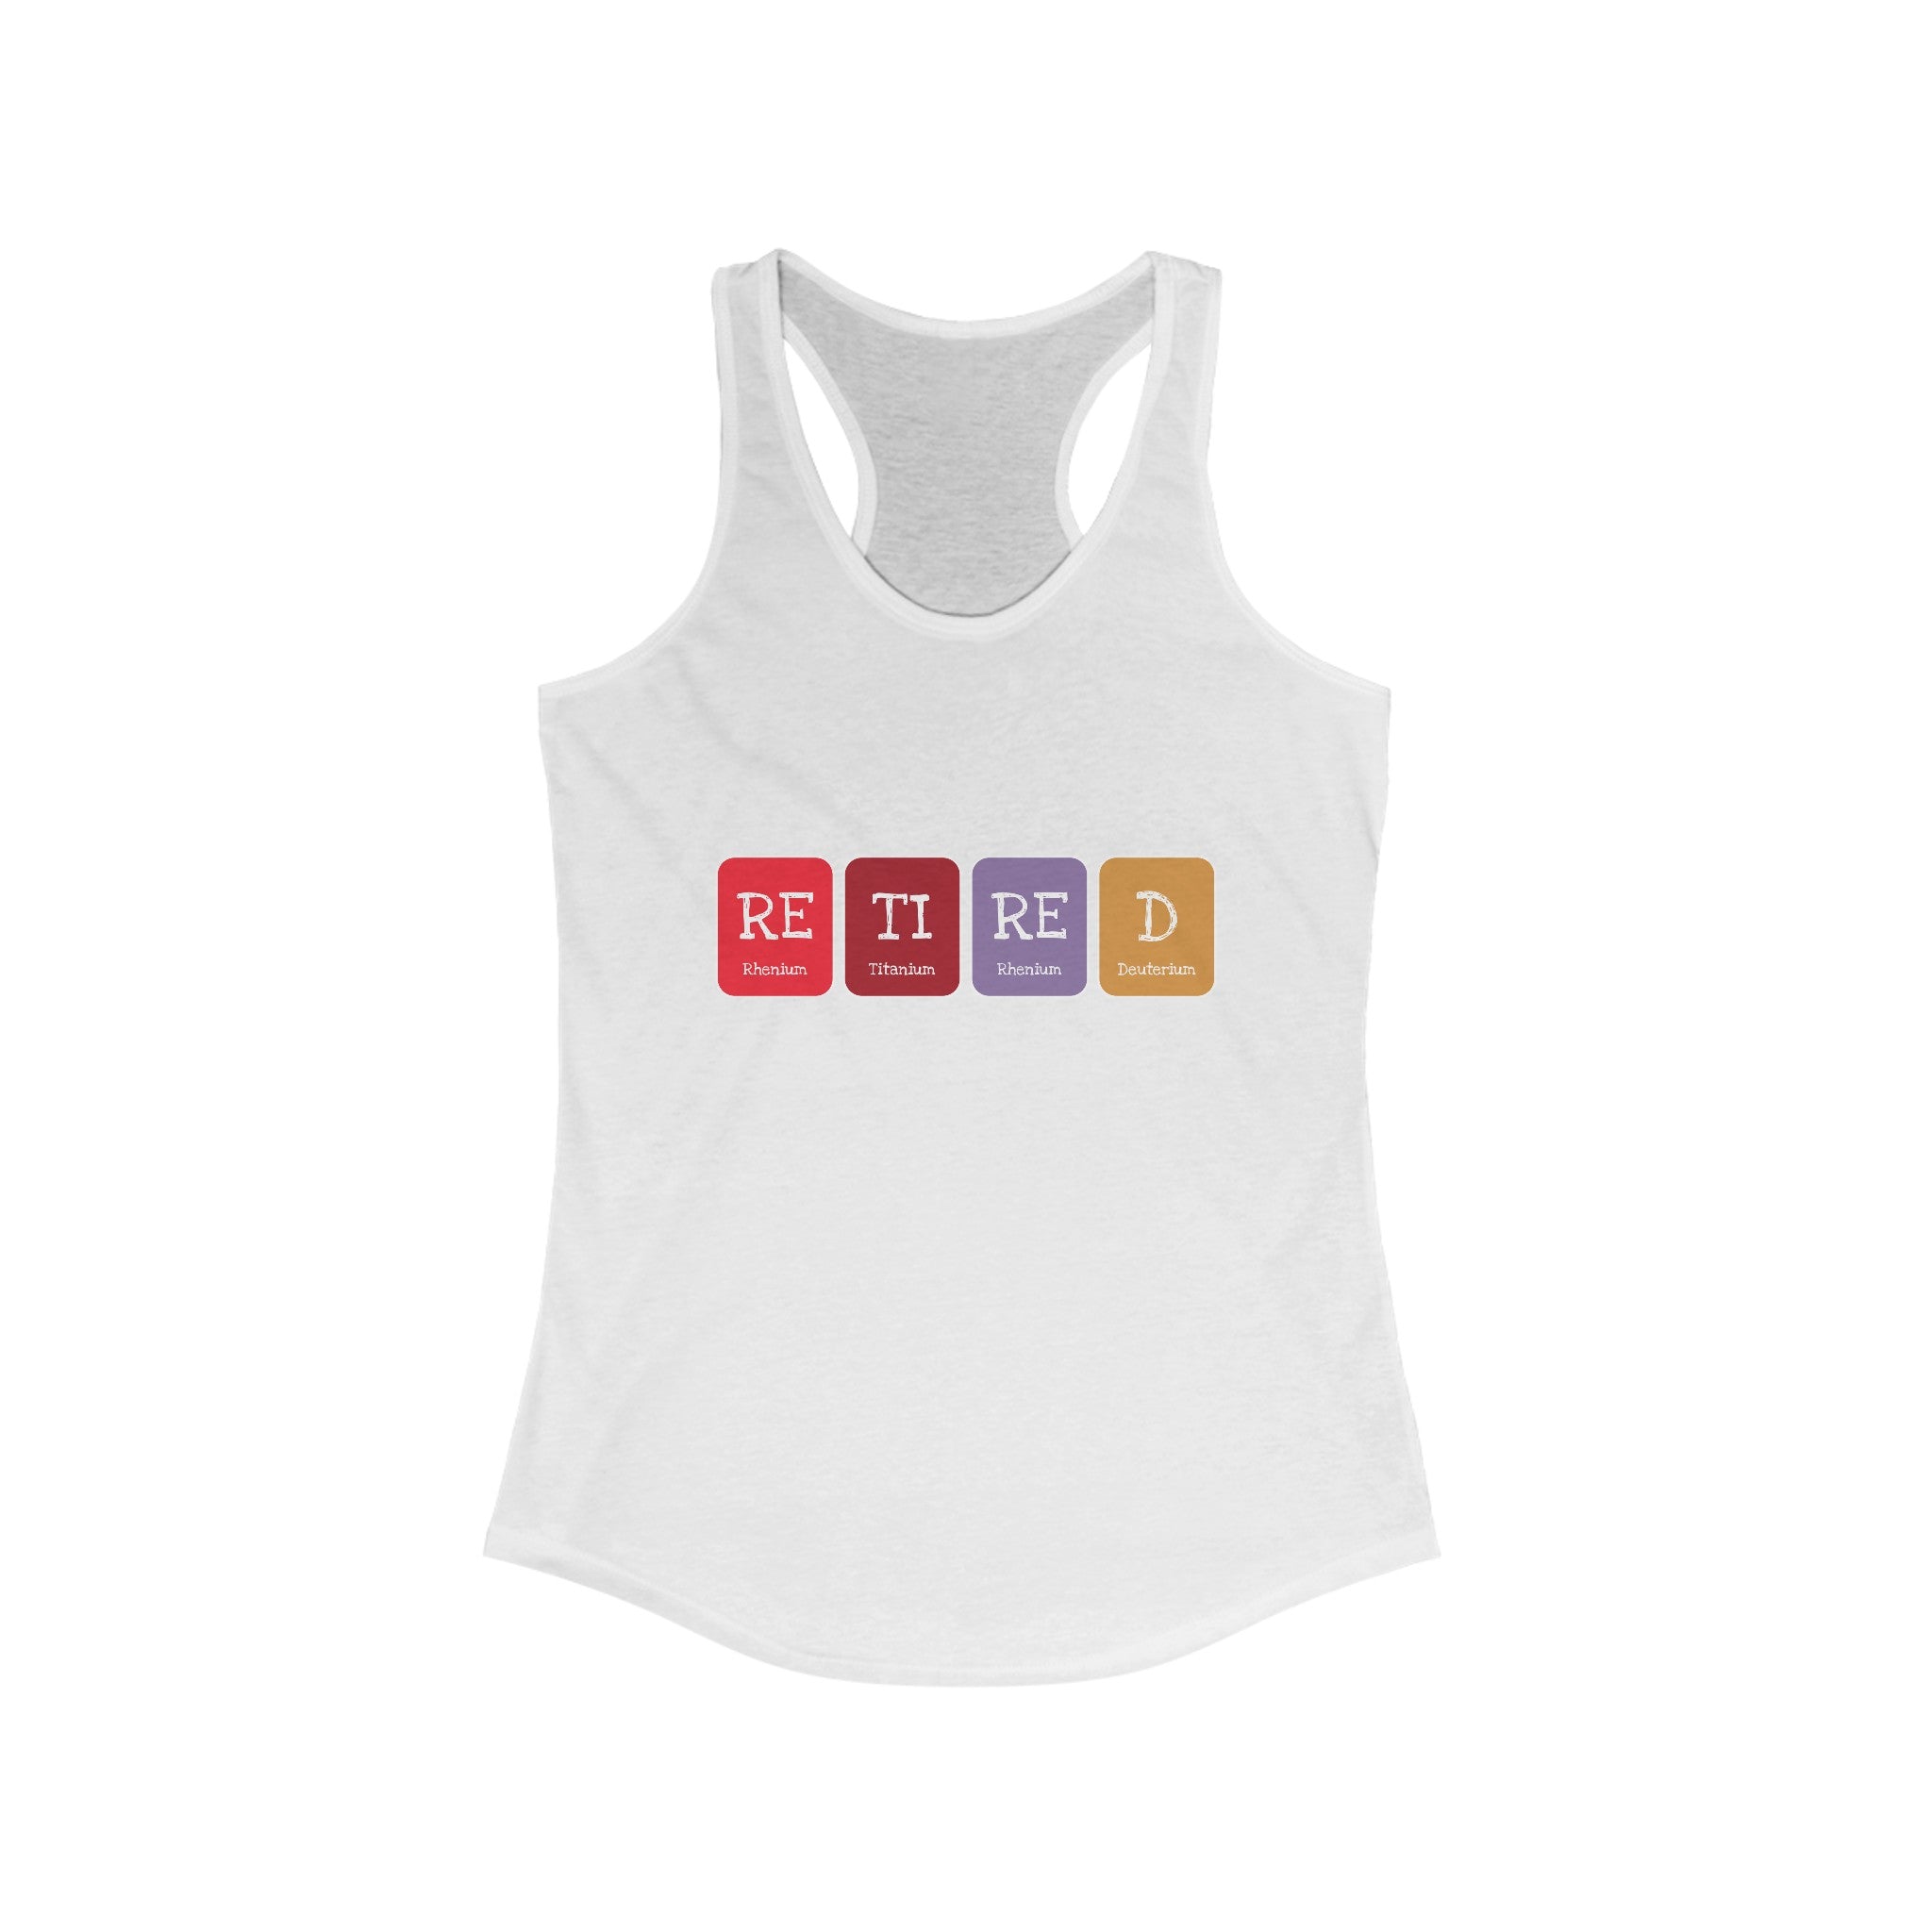 Ultra-lightweight Retired - Women's Racerback Tank featuring the word "RETIR'ED" in colorful periodic table element-style blocks, perfect for an active style.